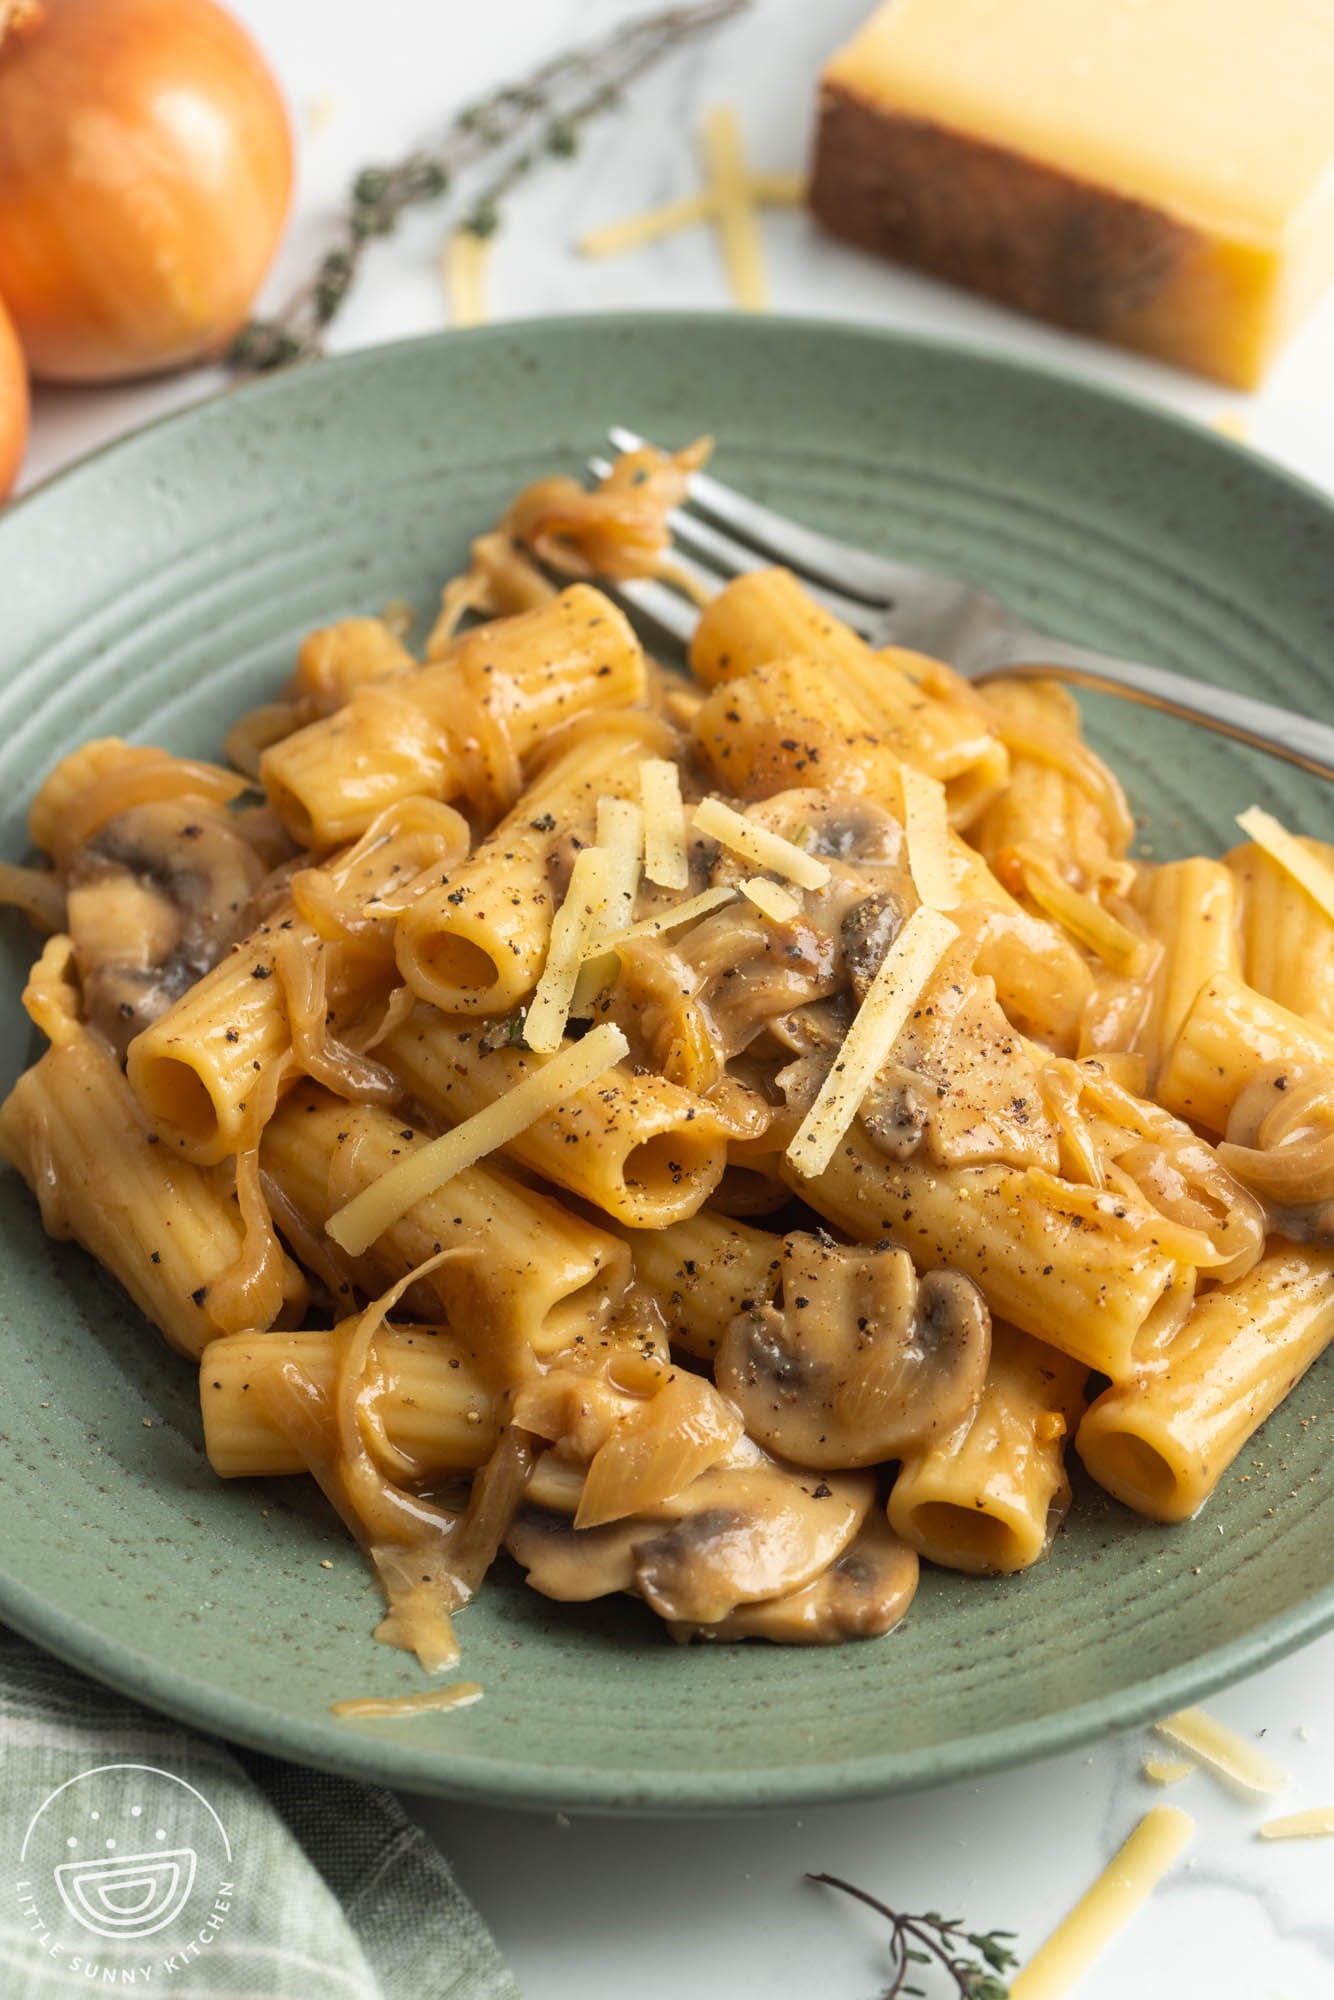 a green plate holding a serving of french onion pasta with mushrooms.